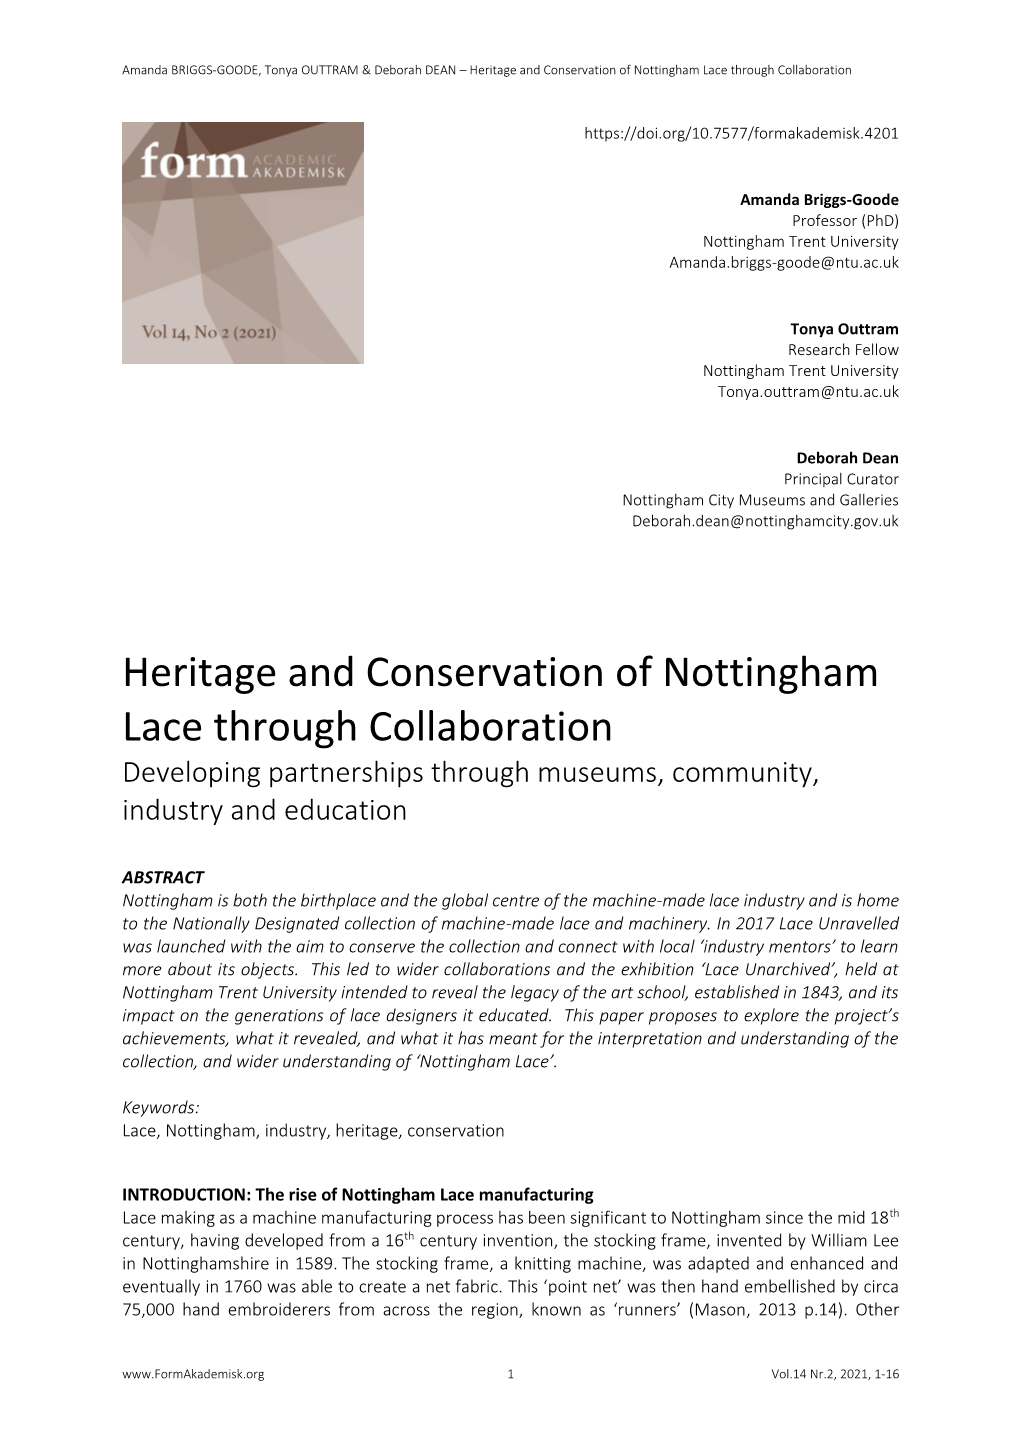 Heritage and Conservation of Nottingham Lace Through Collaboration